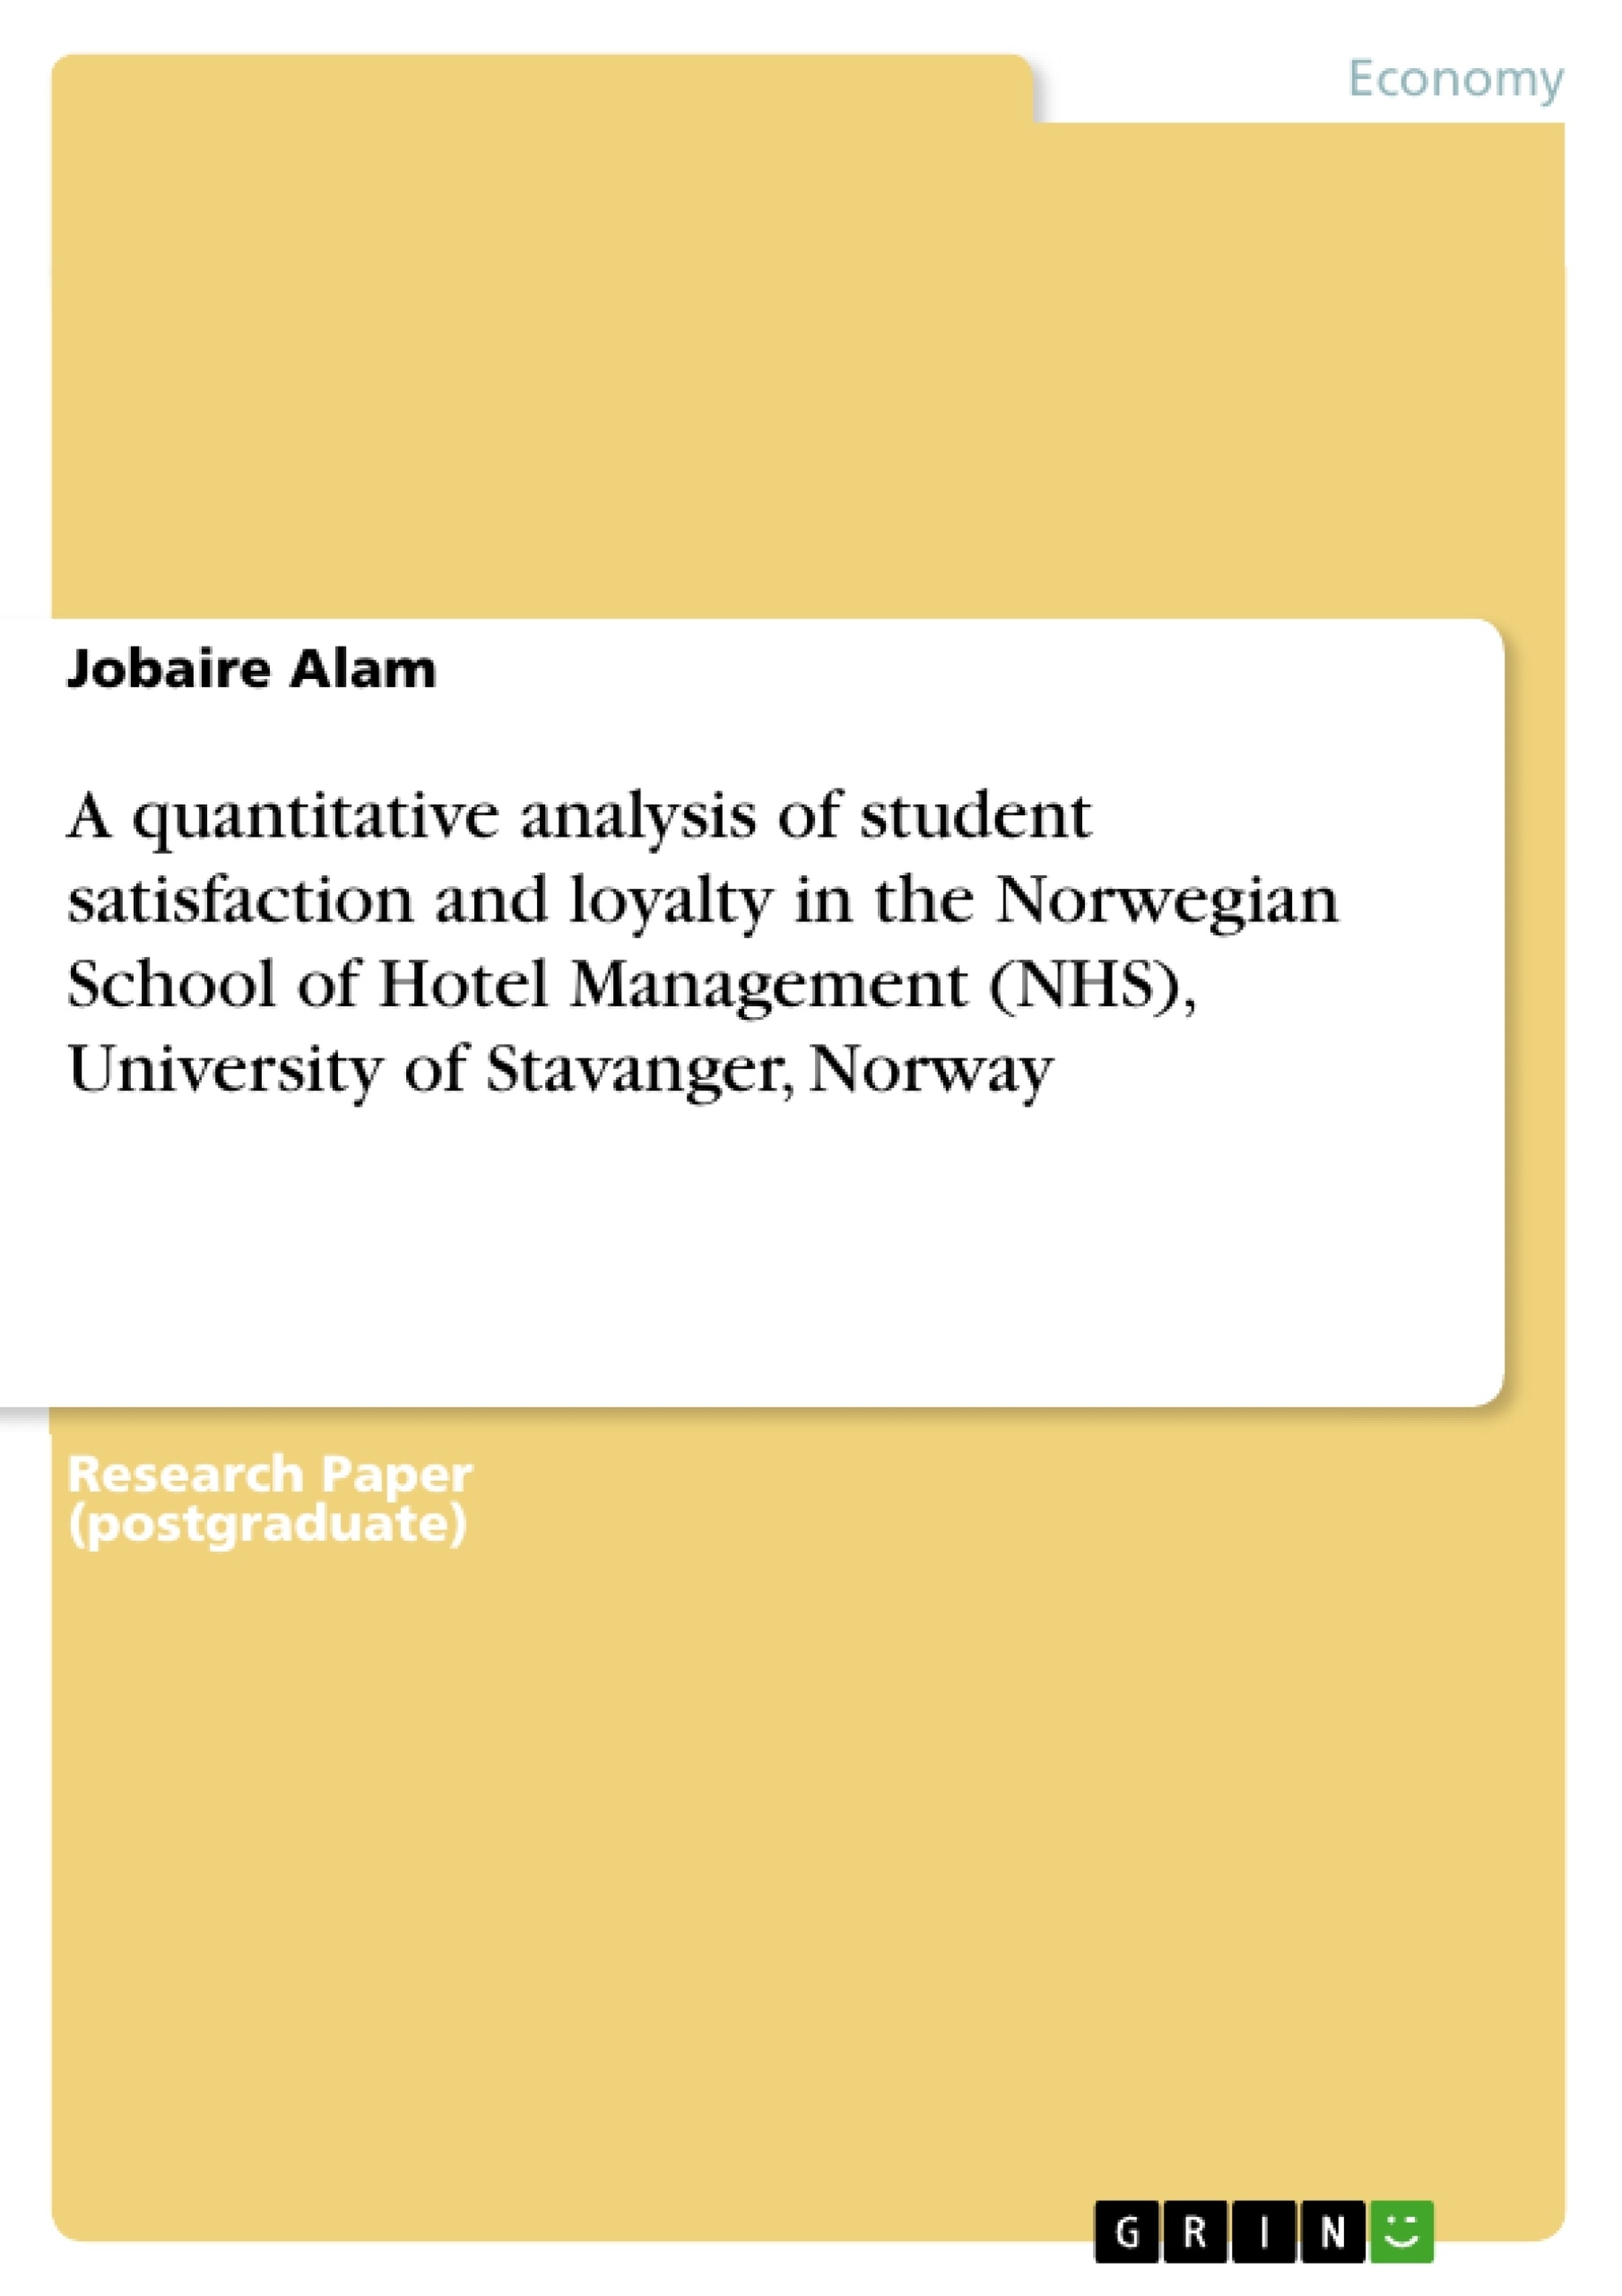 Title: A quantitative analysis of student satisfaction and loyalty in the Norwegian School of Hotel Management (NHS), University of Stavanger, Norway